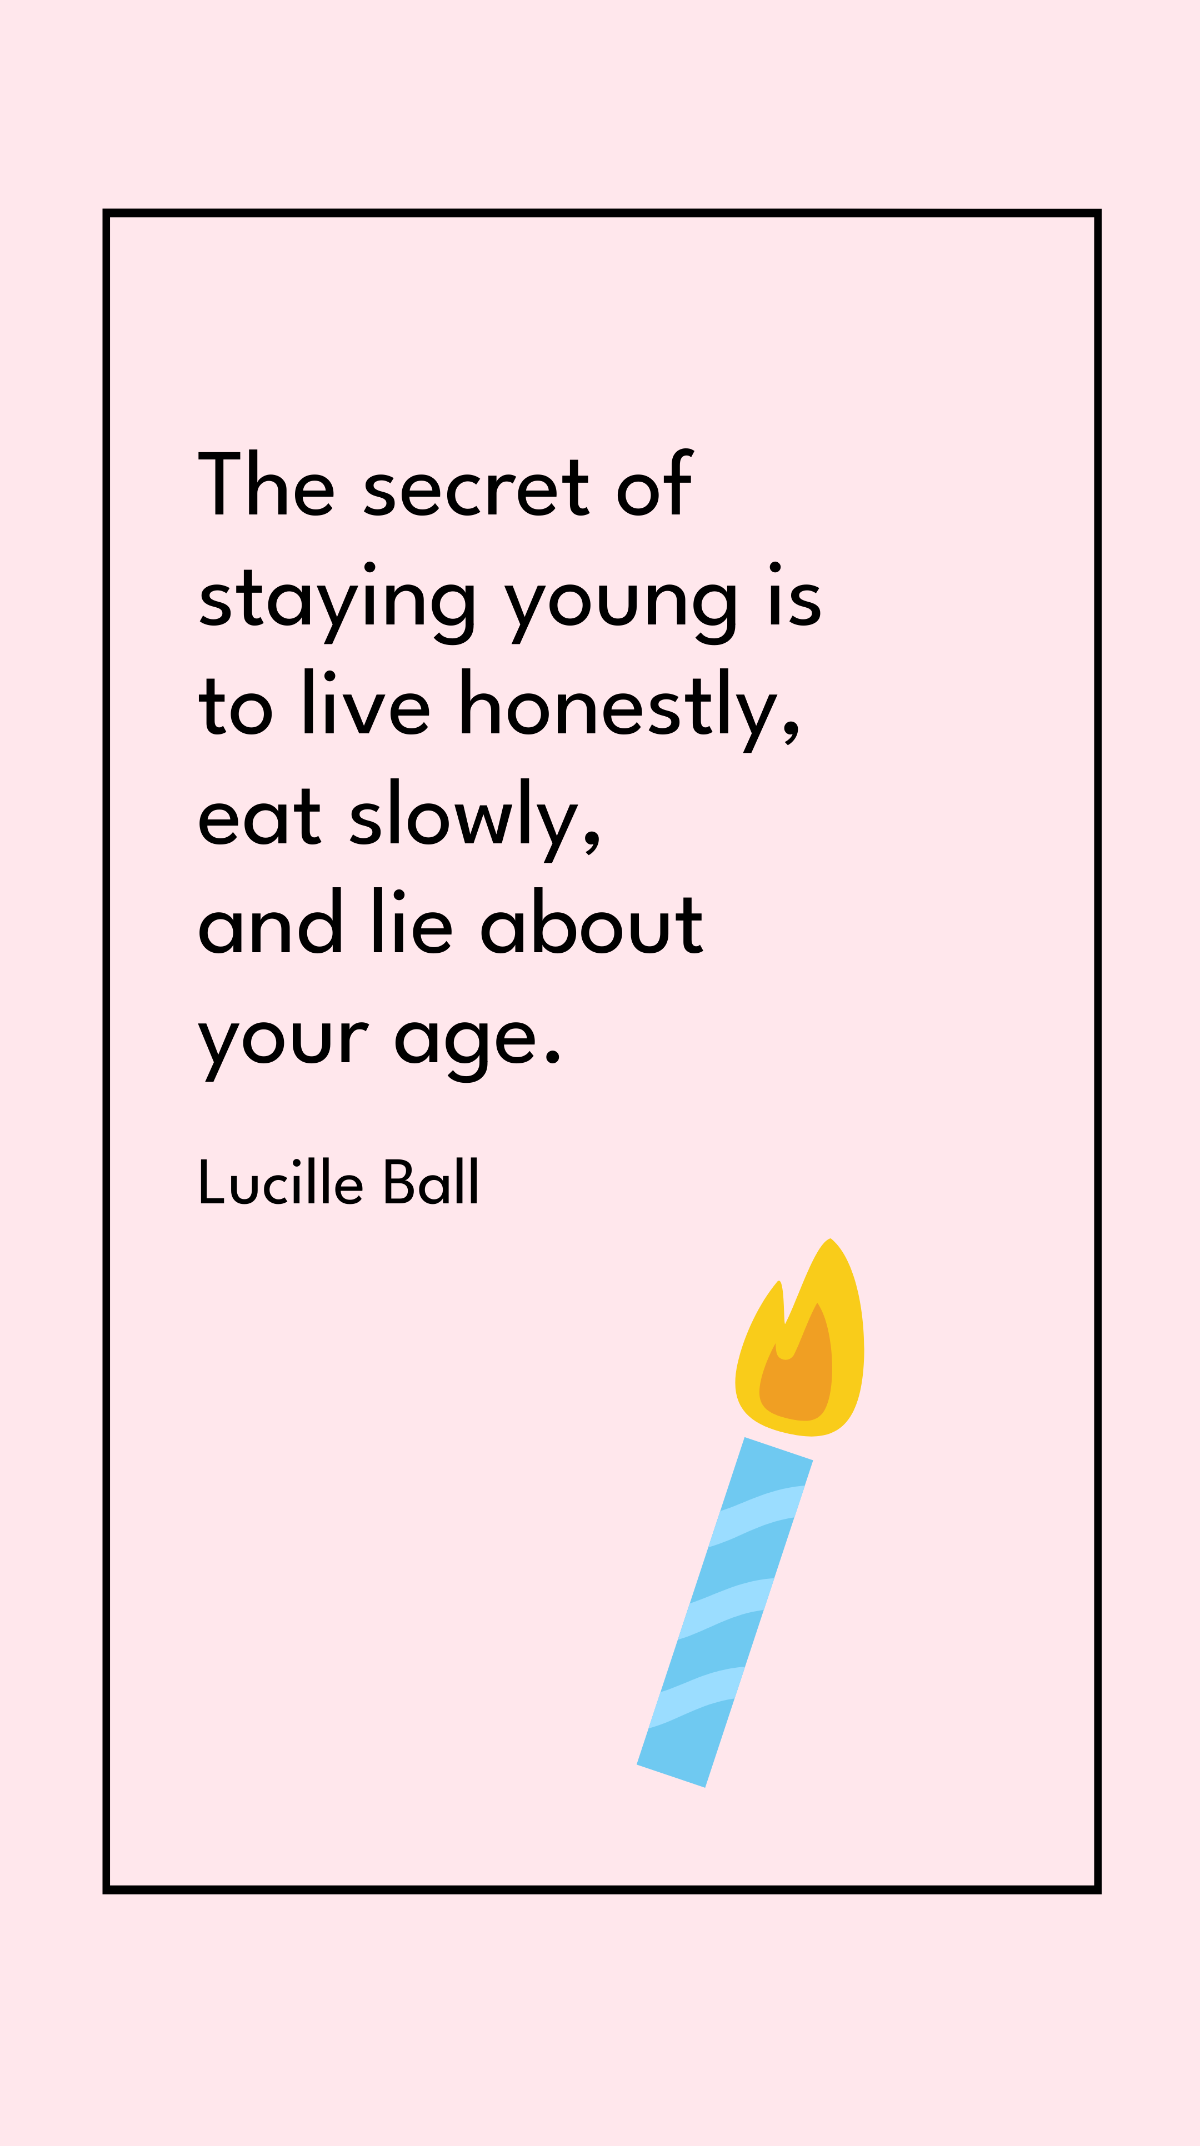 Lucille Ball - The secret of staying young is to live honestly, eat slowly, and lie about your age. Template